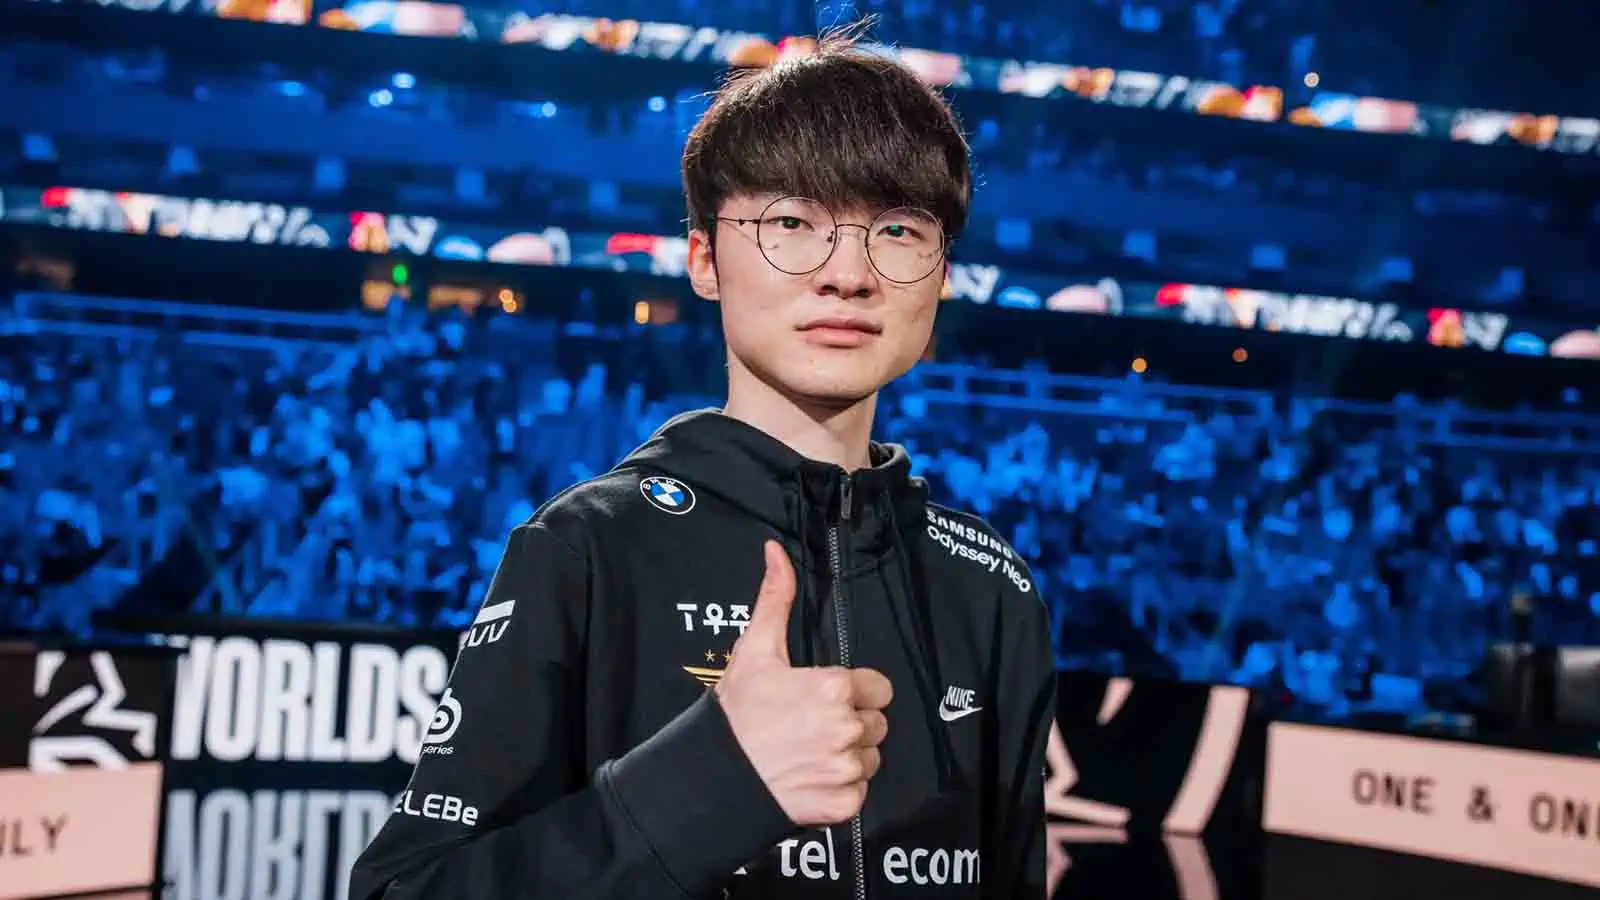 Faker's most played League of Legends champions and their win